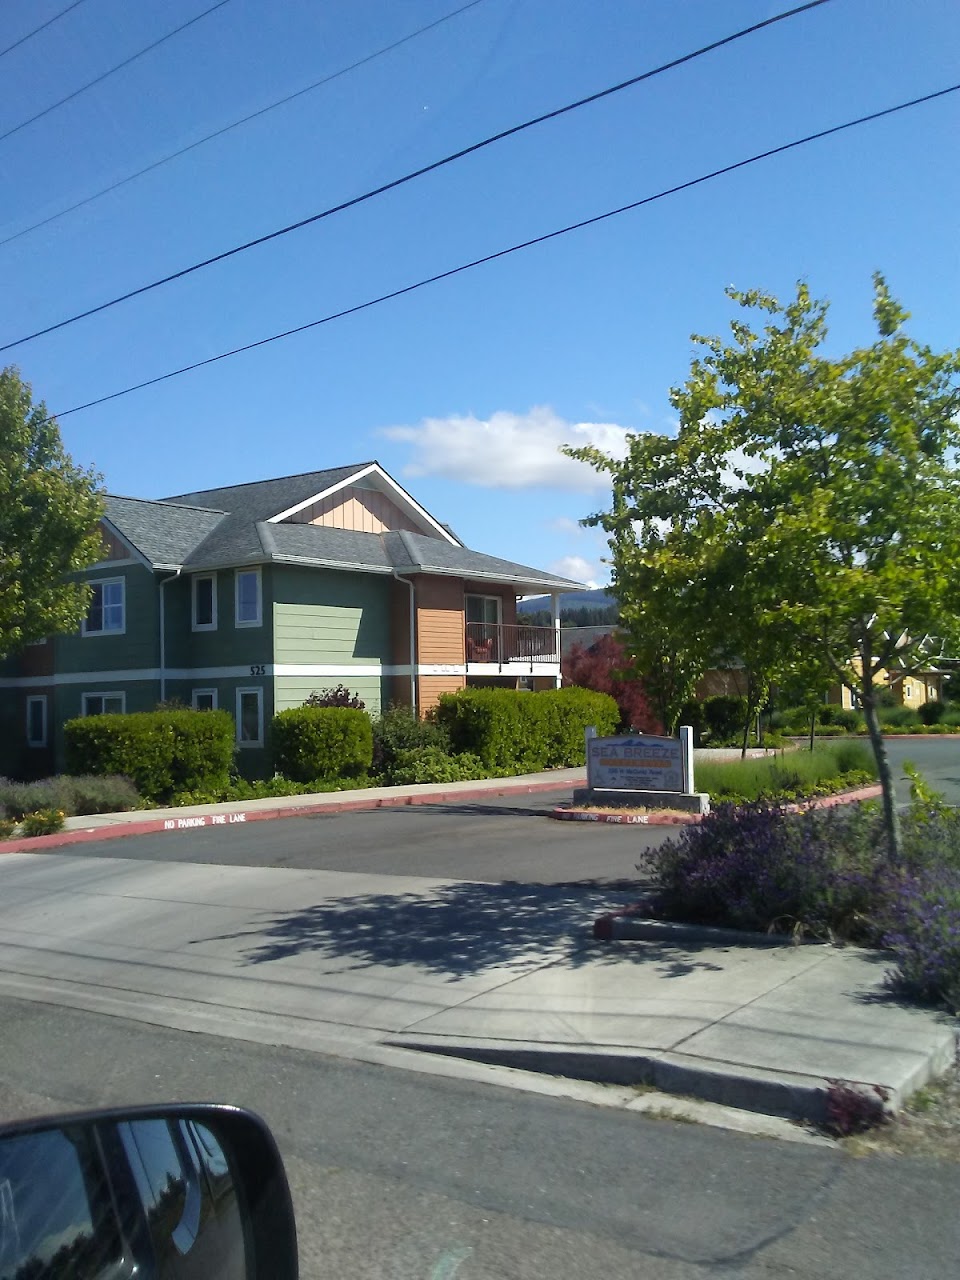 Photo of SEA BREEZE APARTMENTS at 525 W. MCCURDY RD SEQUIM, WA 98382